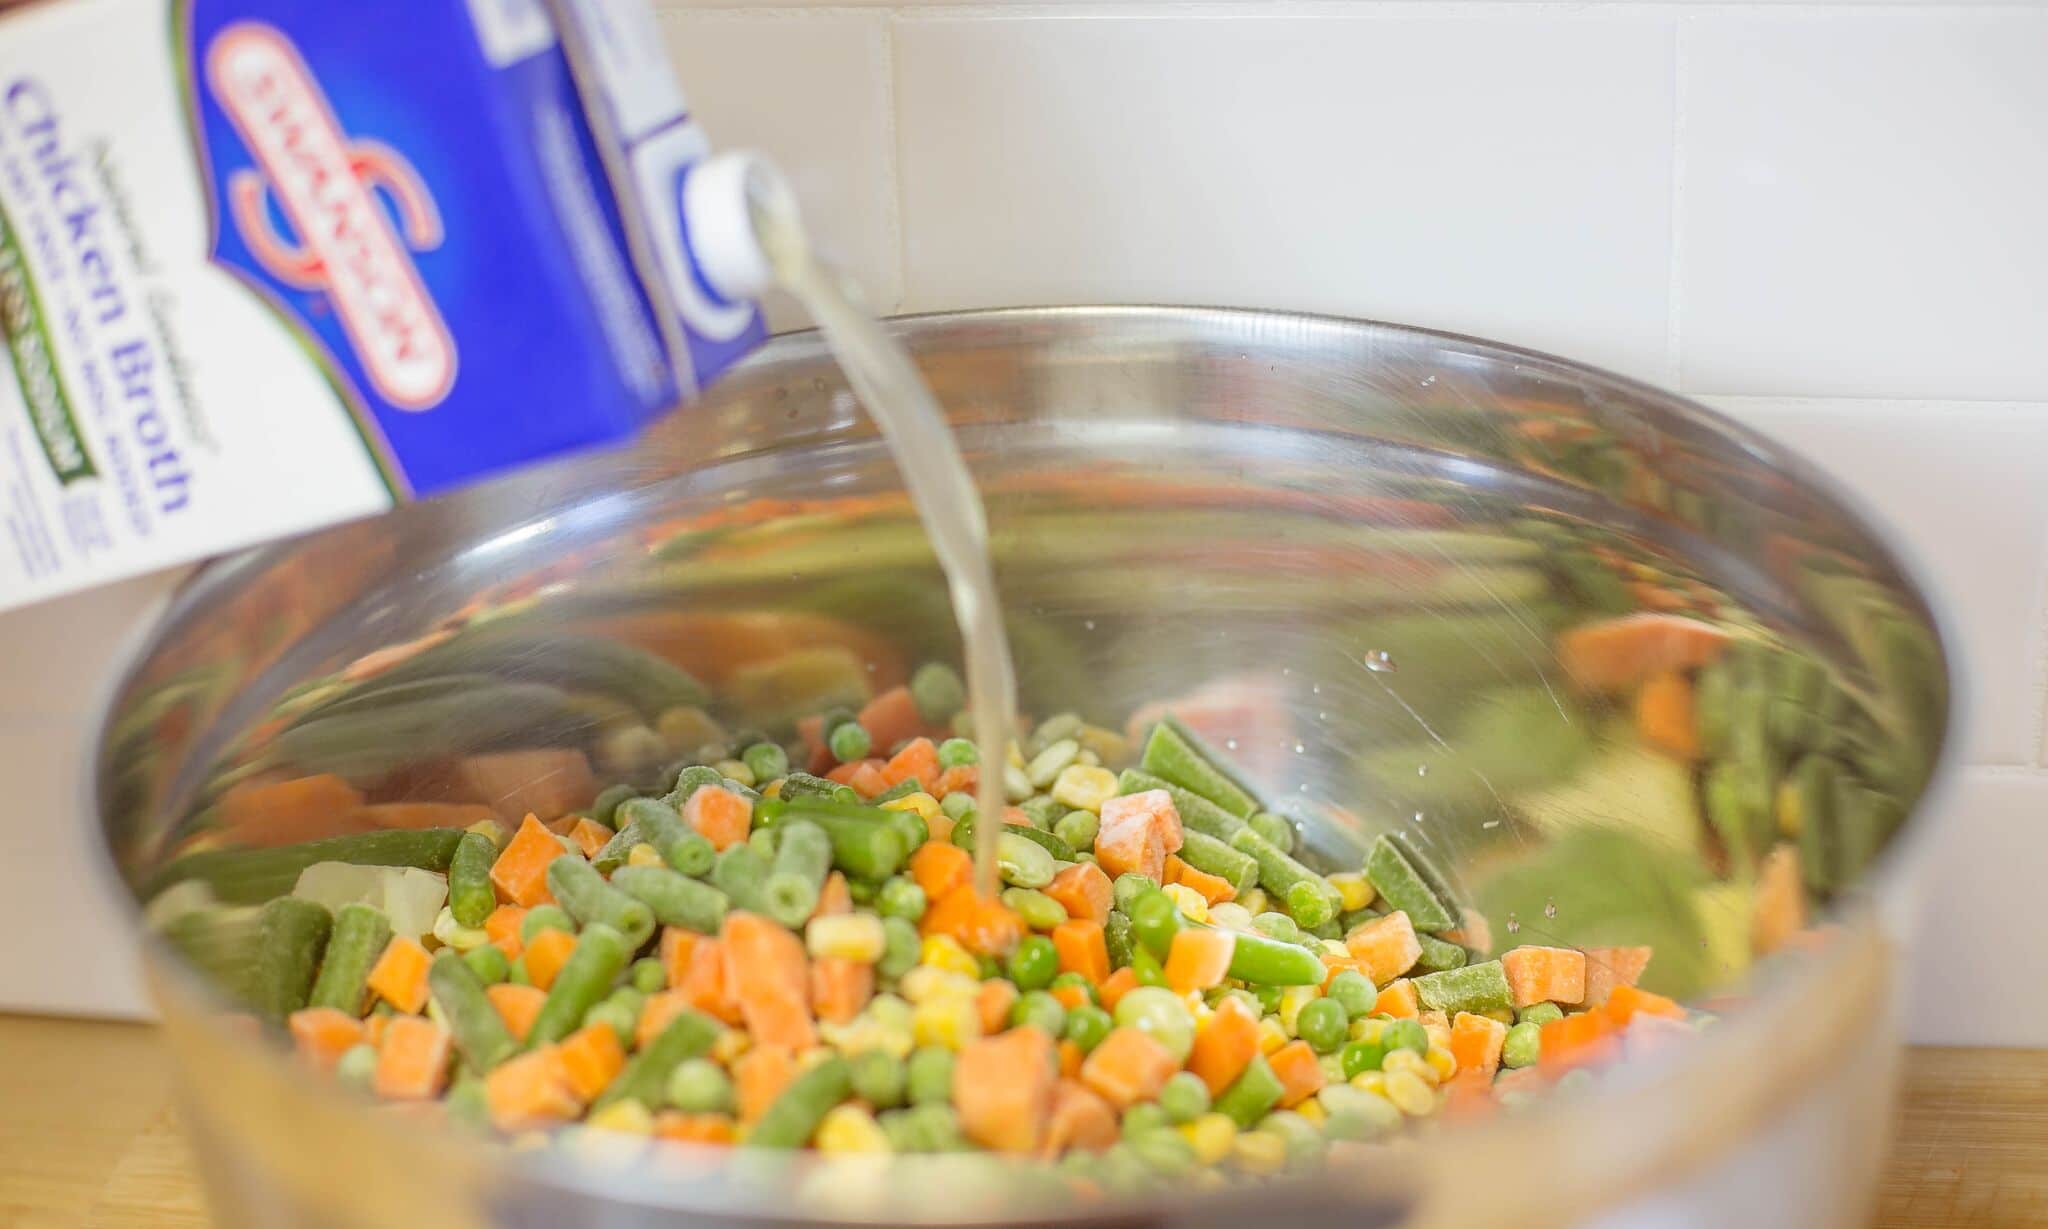 In a large bowl mix together onions, carrots, celery and mixed veggies then add chicken stock, slat and pepper